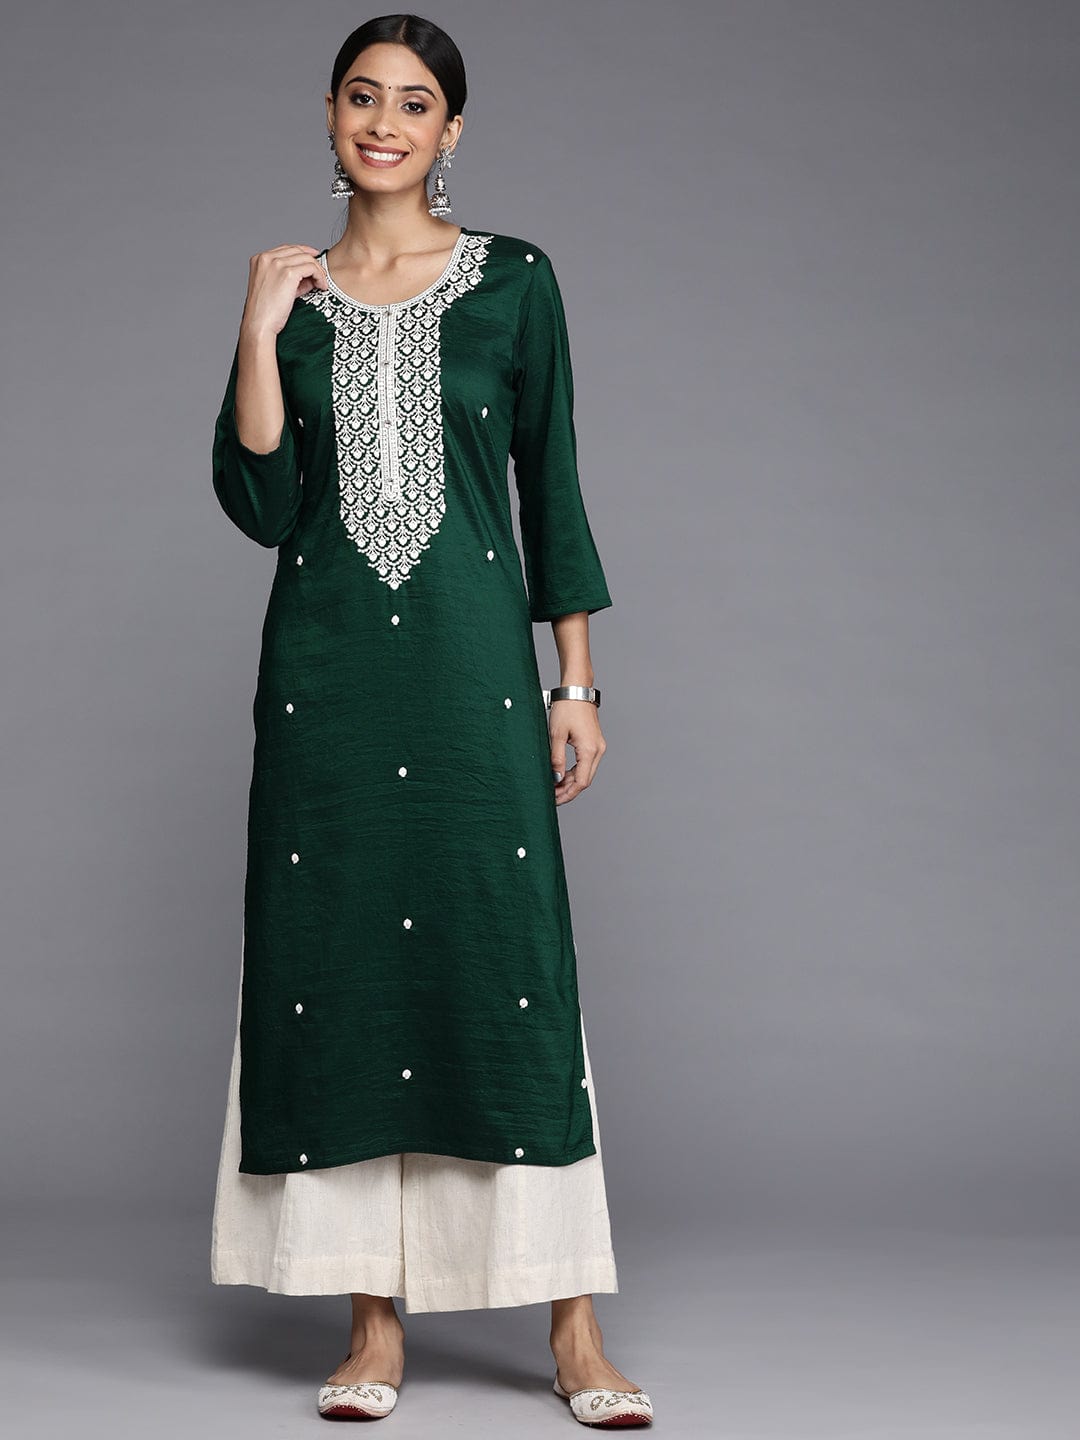 Dark Green Colour 34 Sleeves Ladies Kurti For Party And Casual Wear  Decoration Material Laces at Best Price in Bhiwani  V World